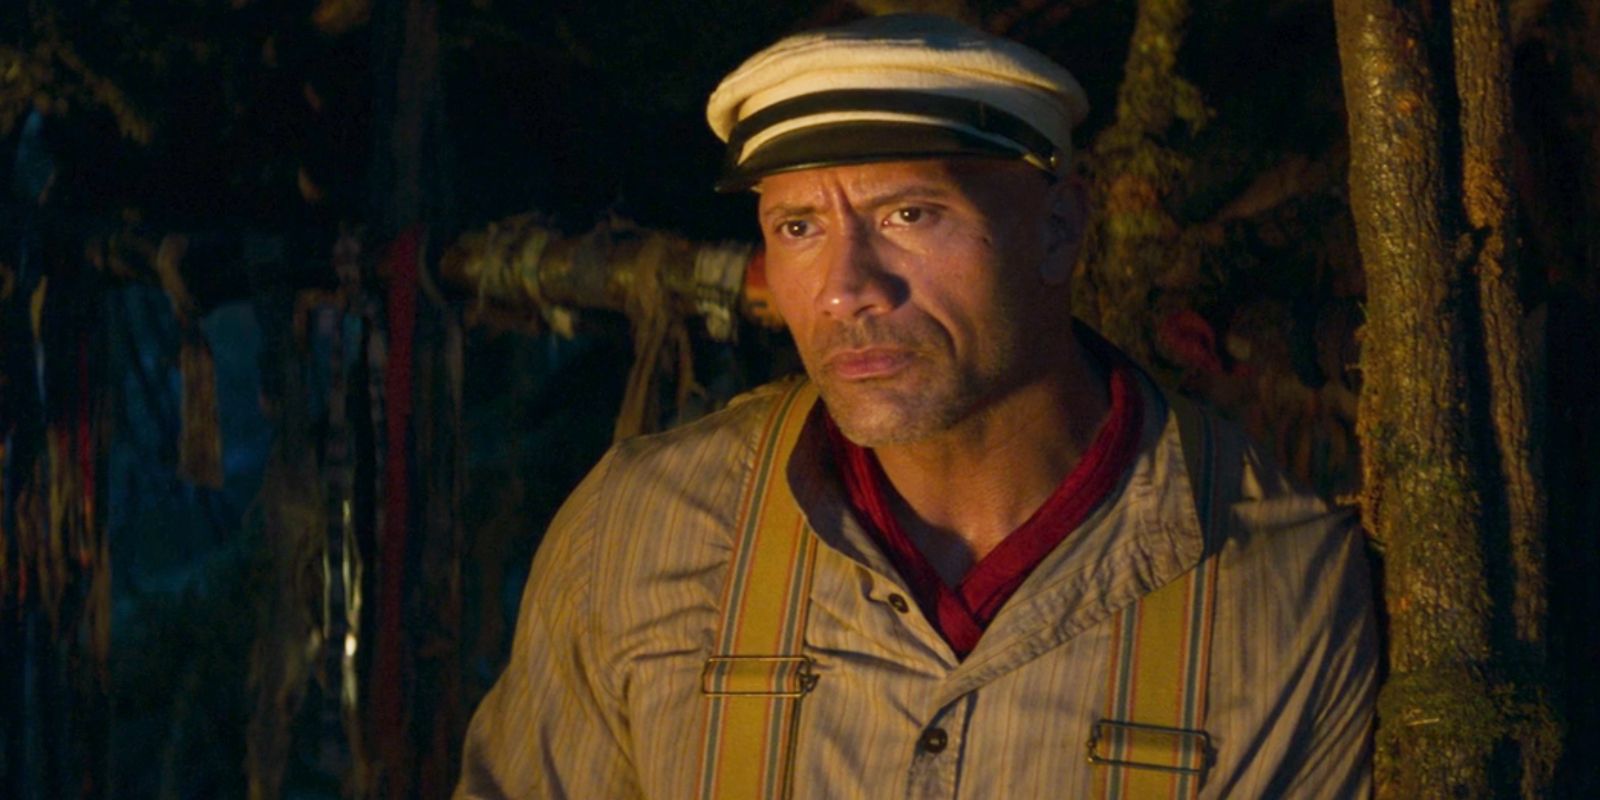 Dwayne Johnson's Frank looking sternly in Jungle Cruise